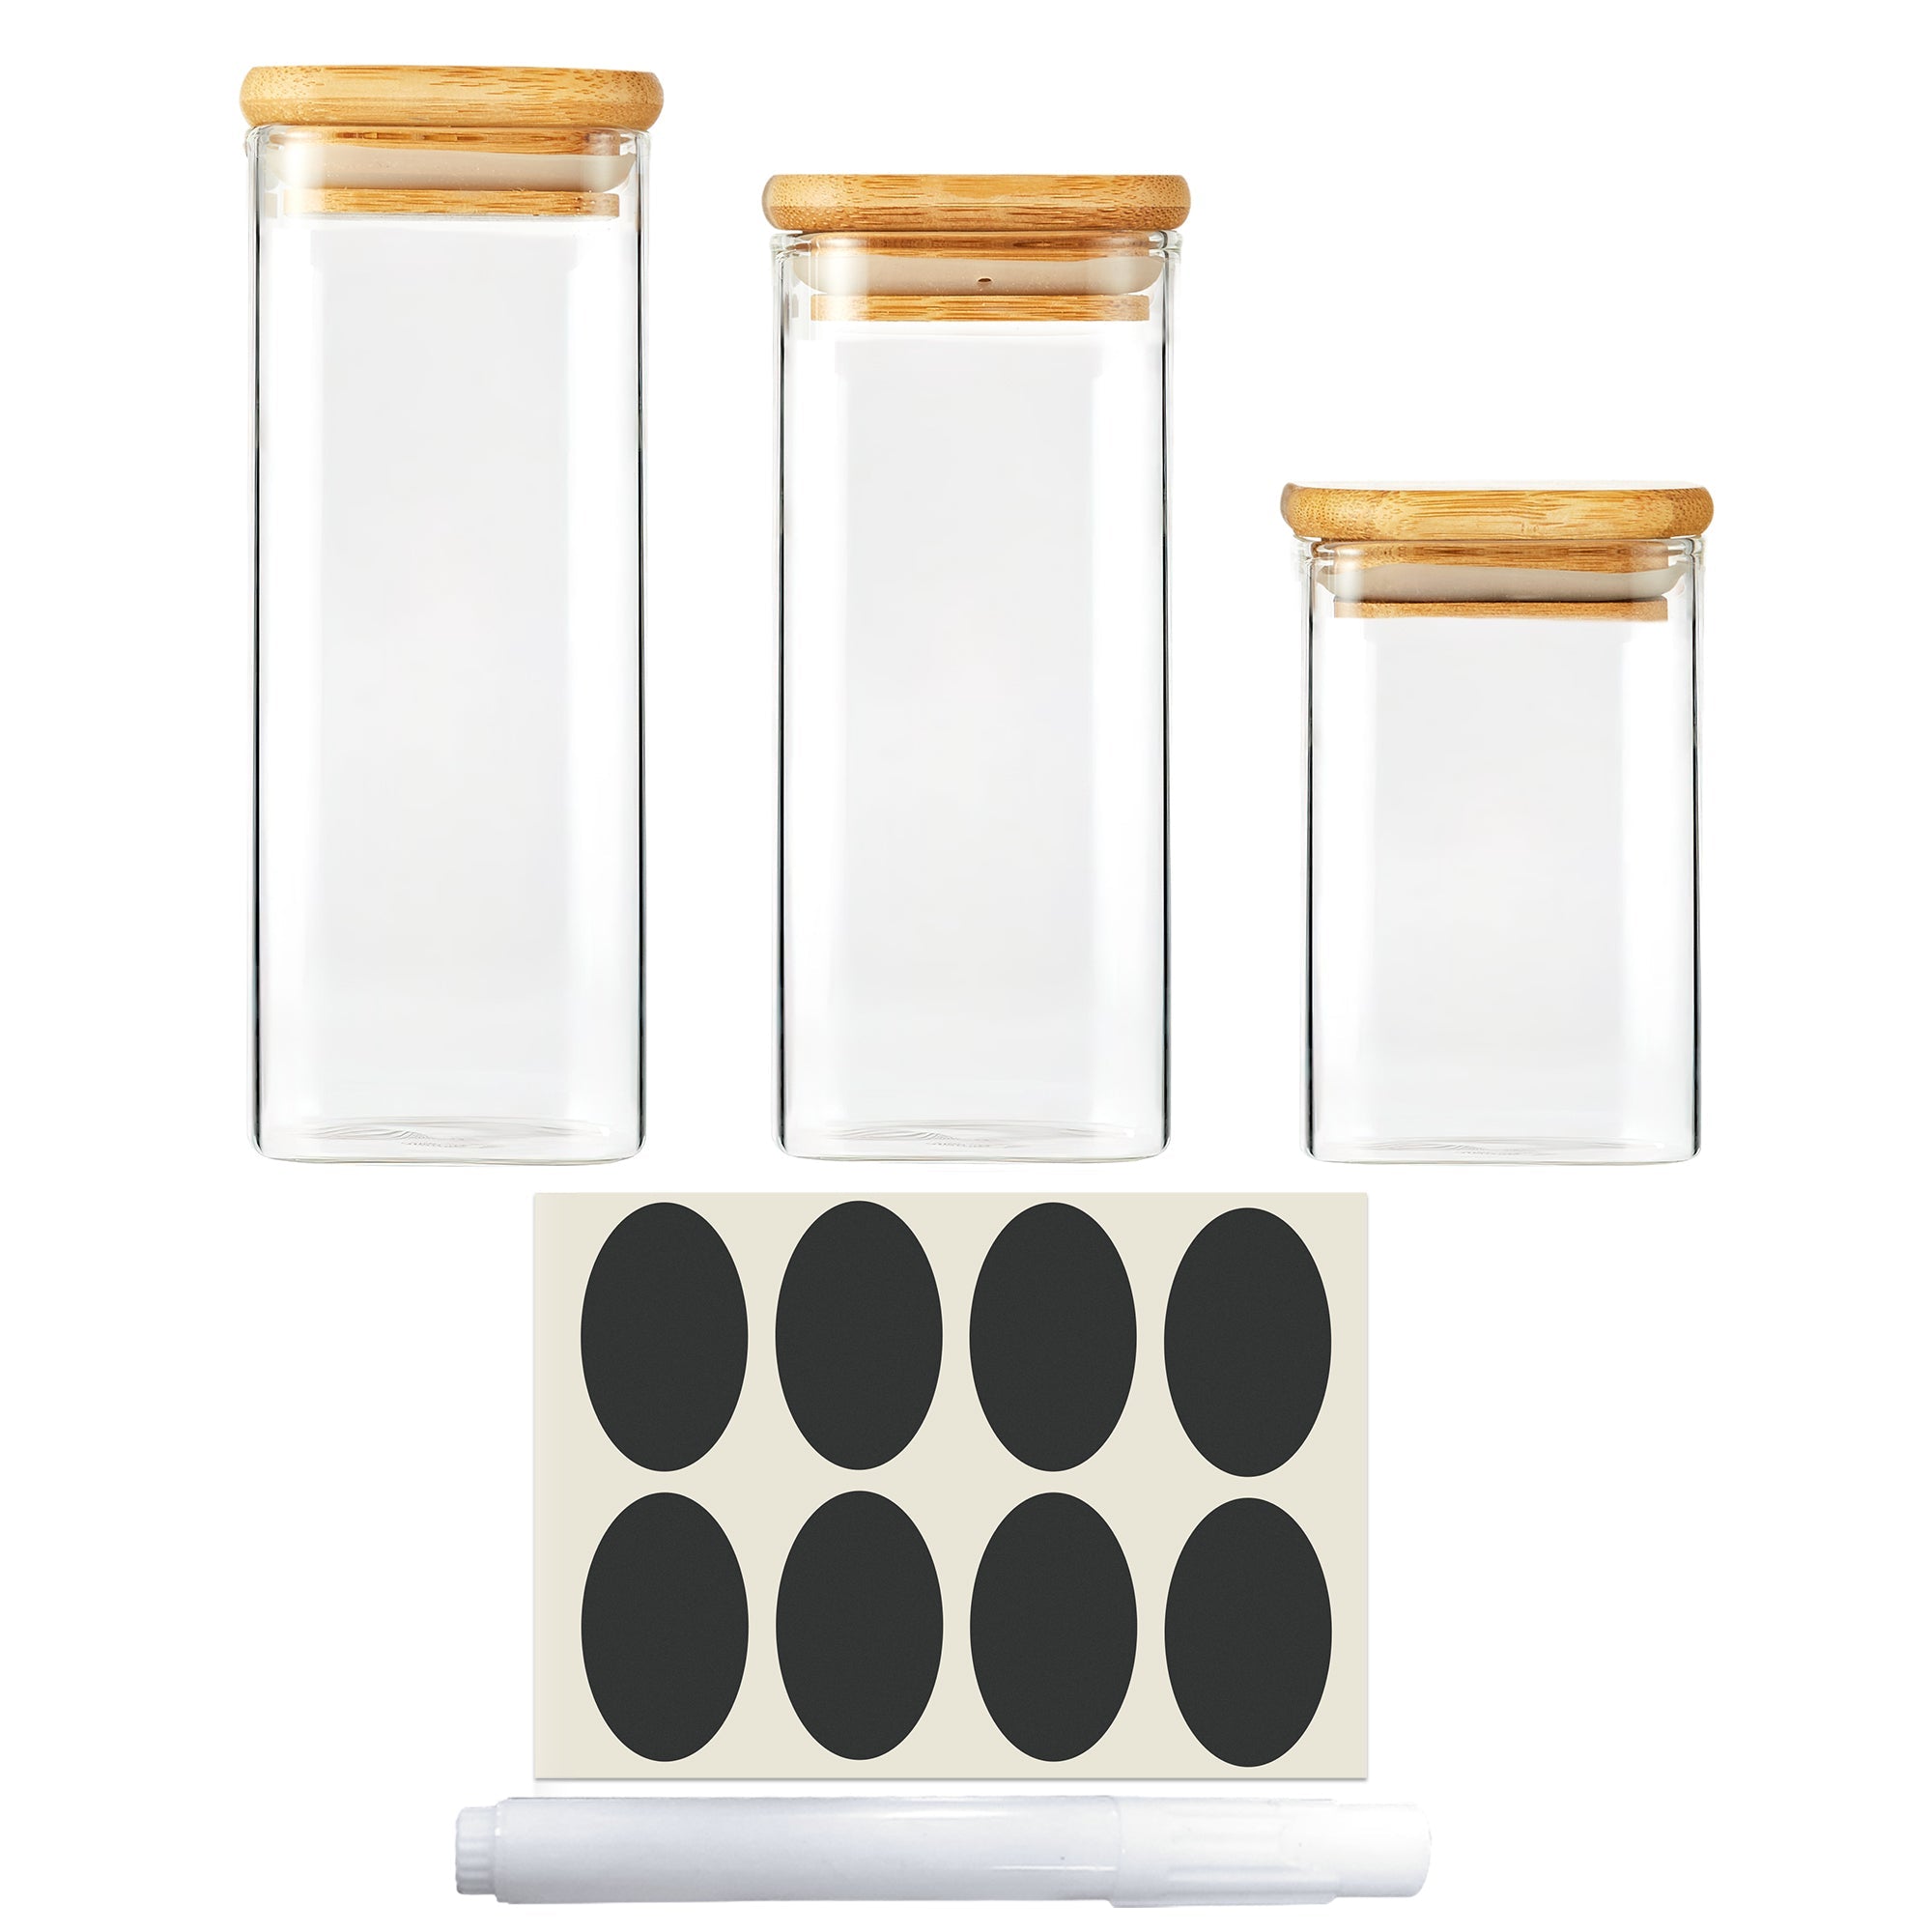 https://cdn.shopify.com/s/files/1/2091/6511/products/berkware-square-food-storage-glass-jar-set-with-bamboo-lids-and-display-stand-3-piece-set-529777.jpg?v=1671782515